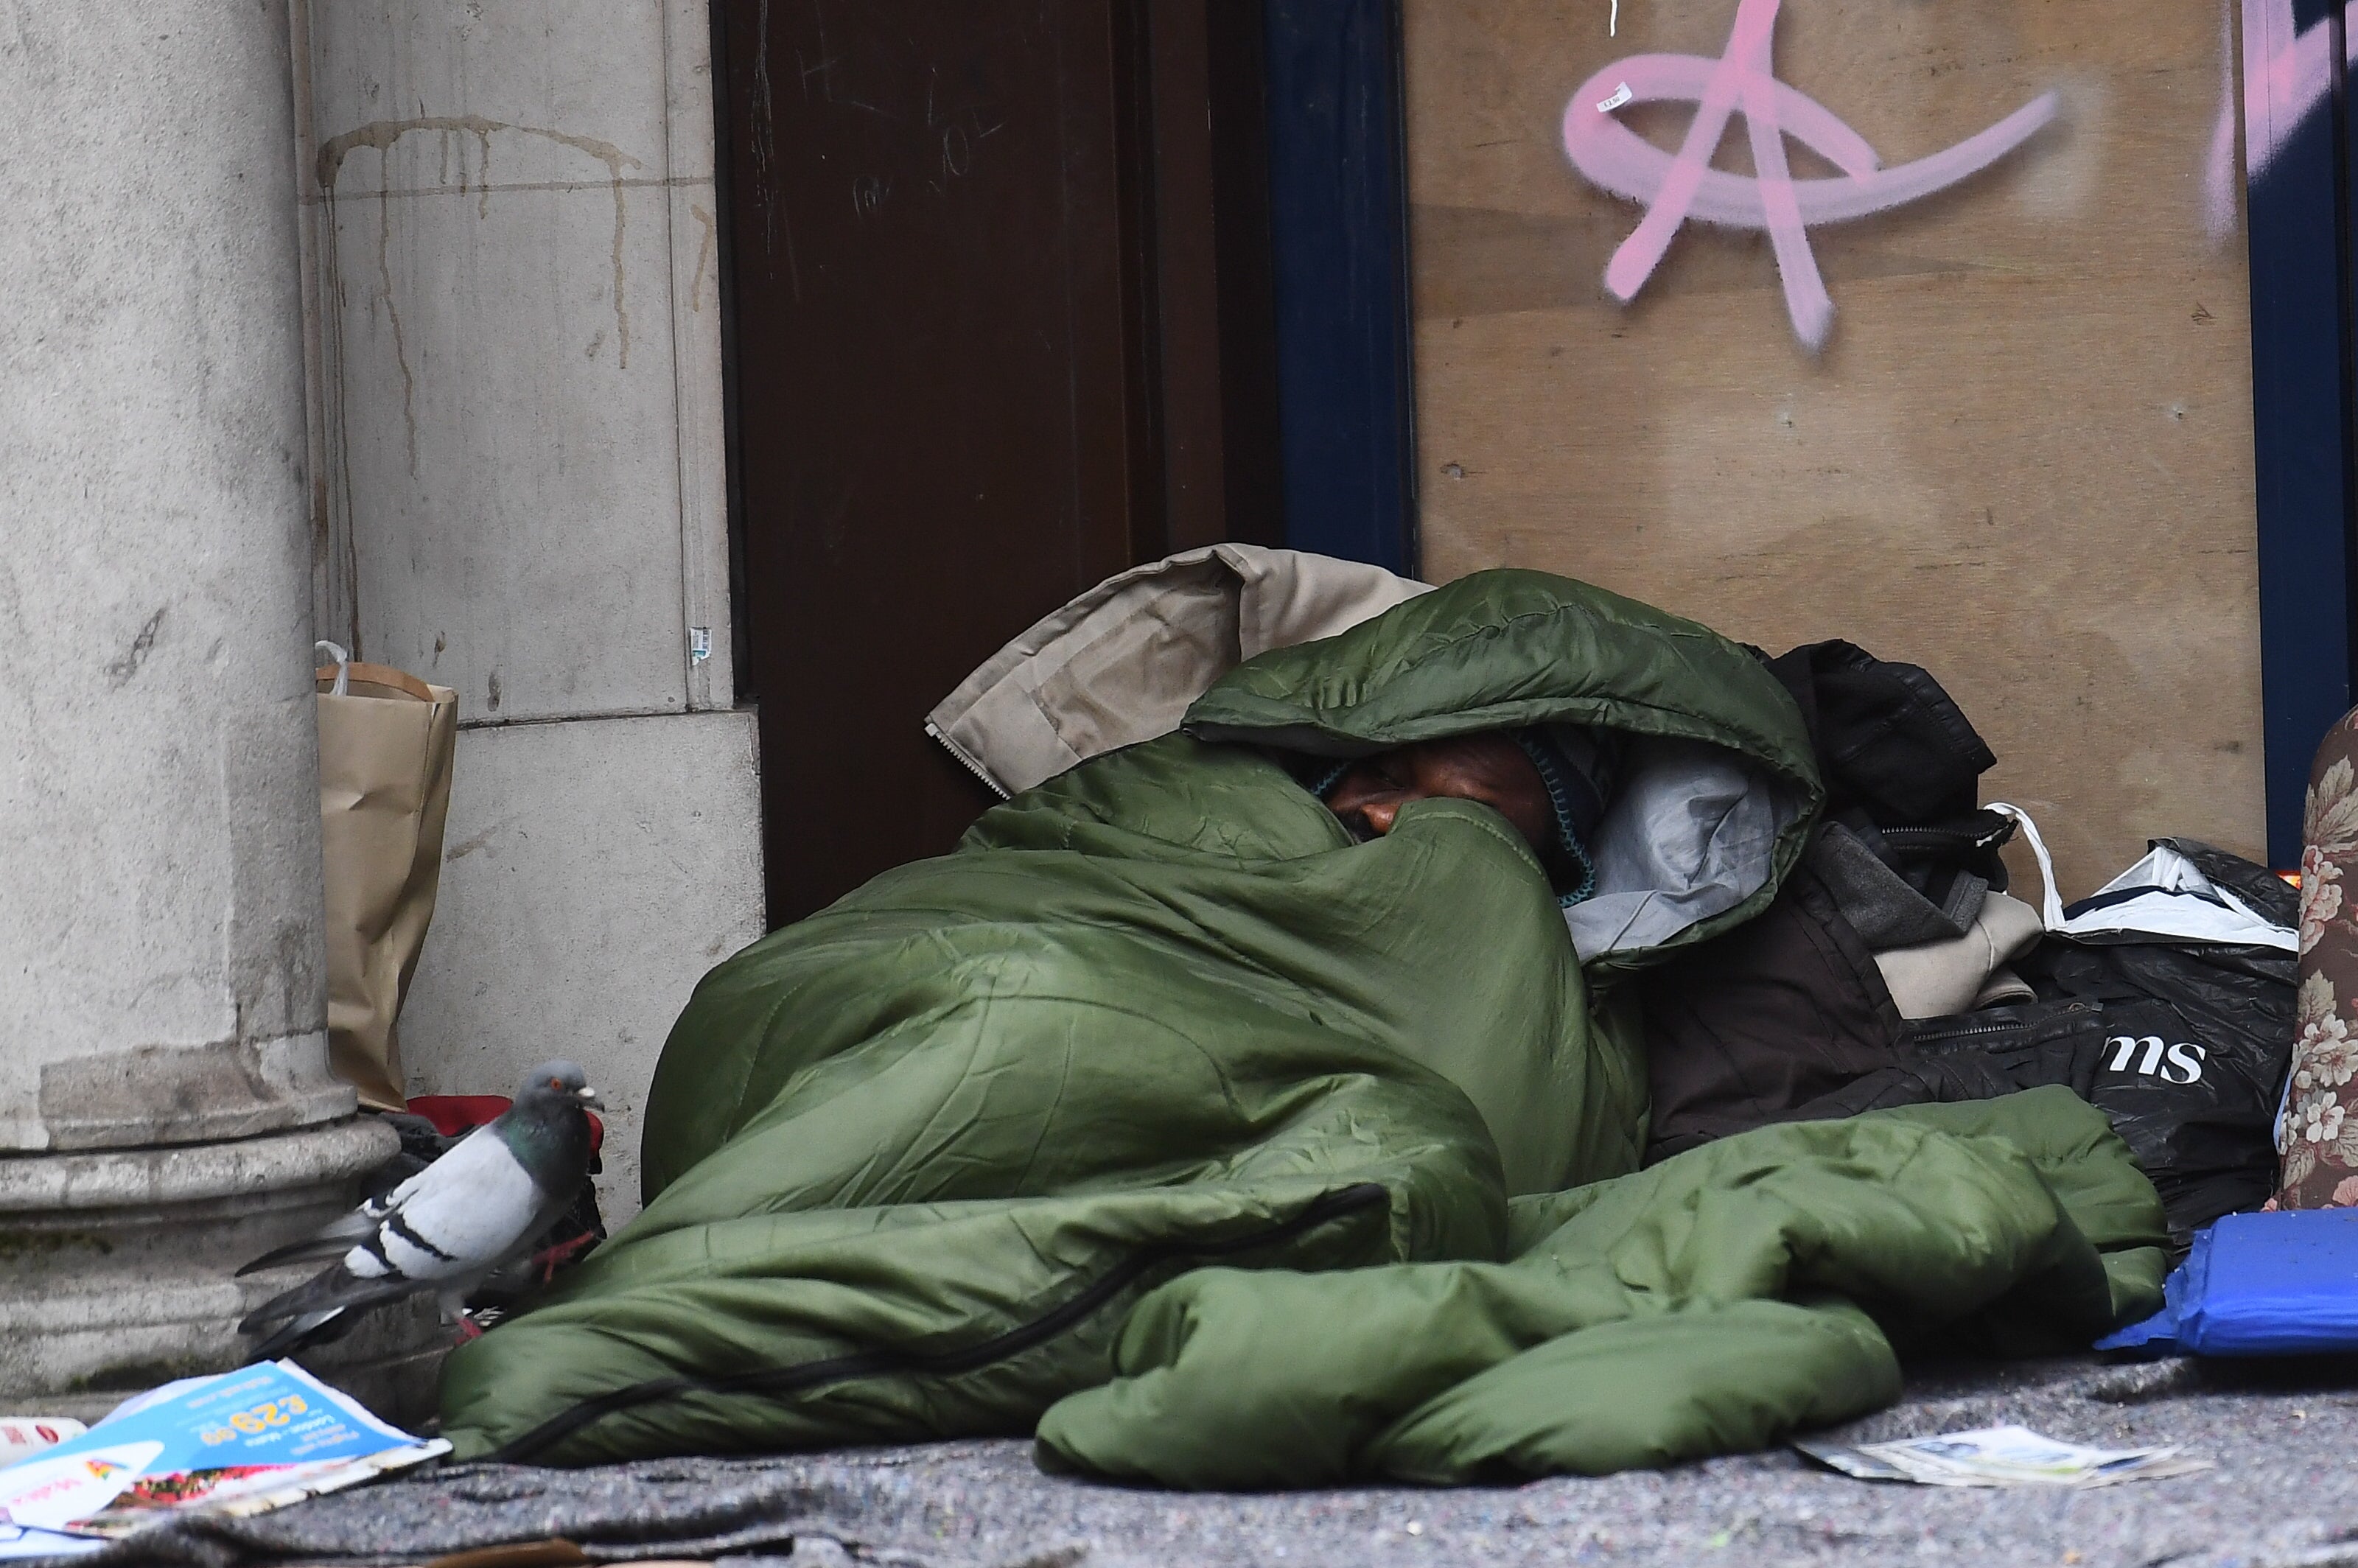 New data shows more than 1,280 people who were sleeping rough or living in emergency accommodation lost their lives last year